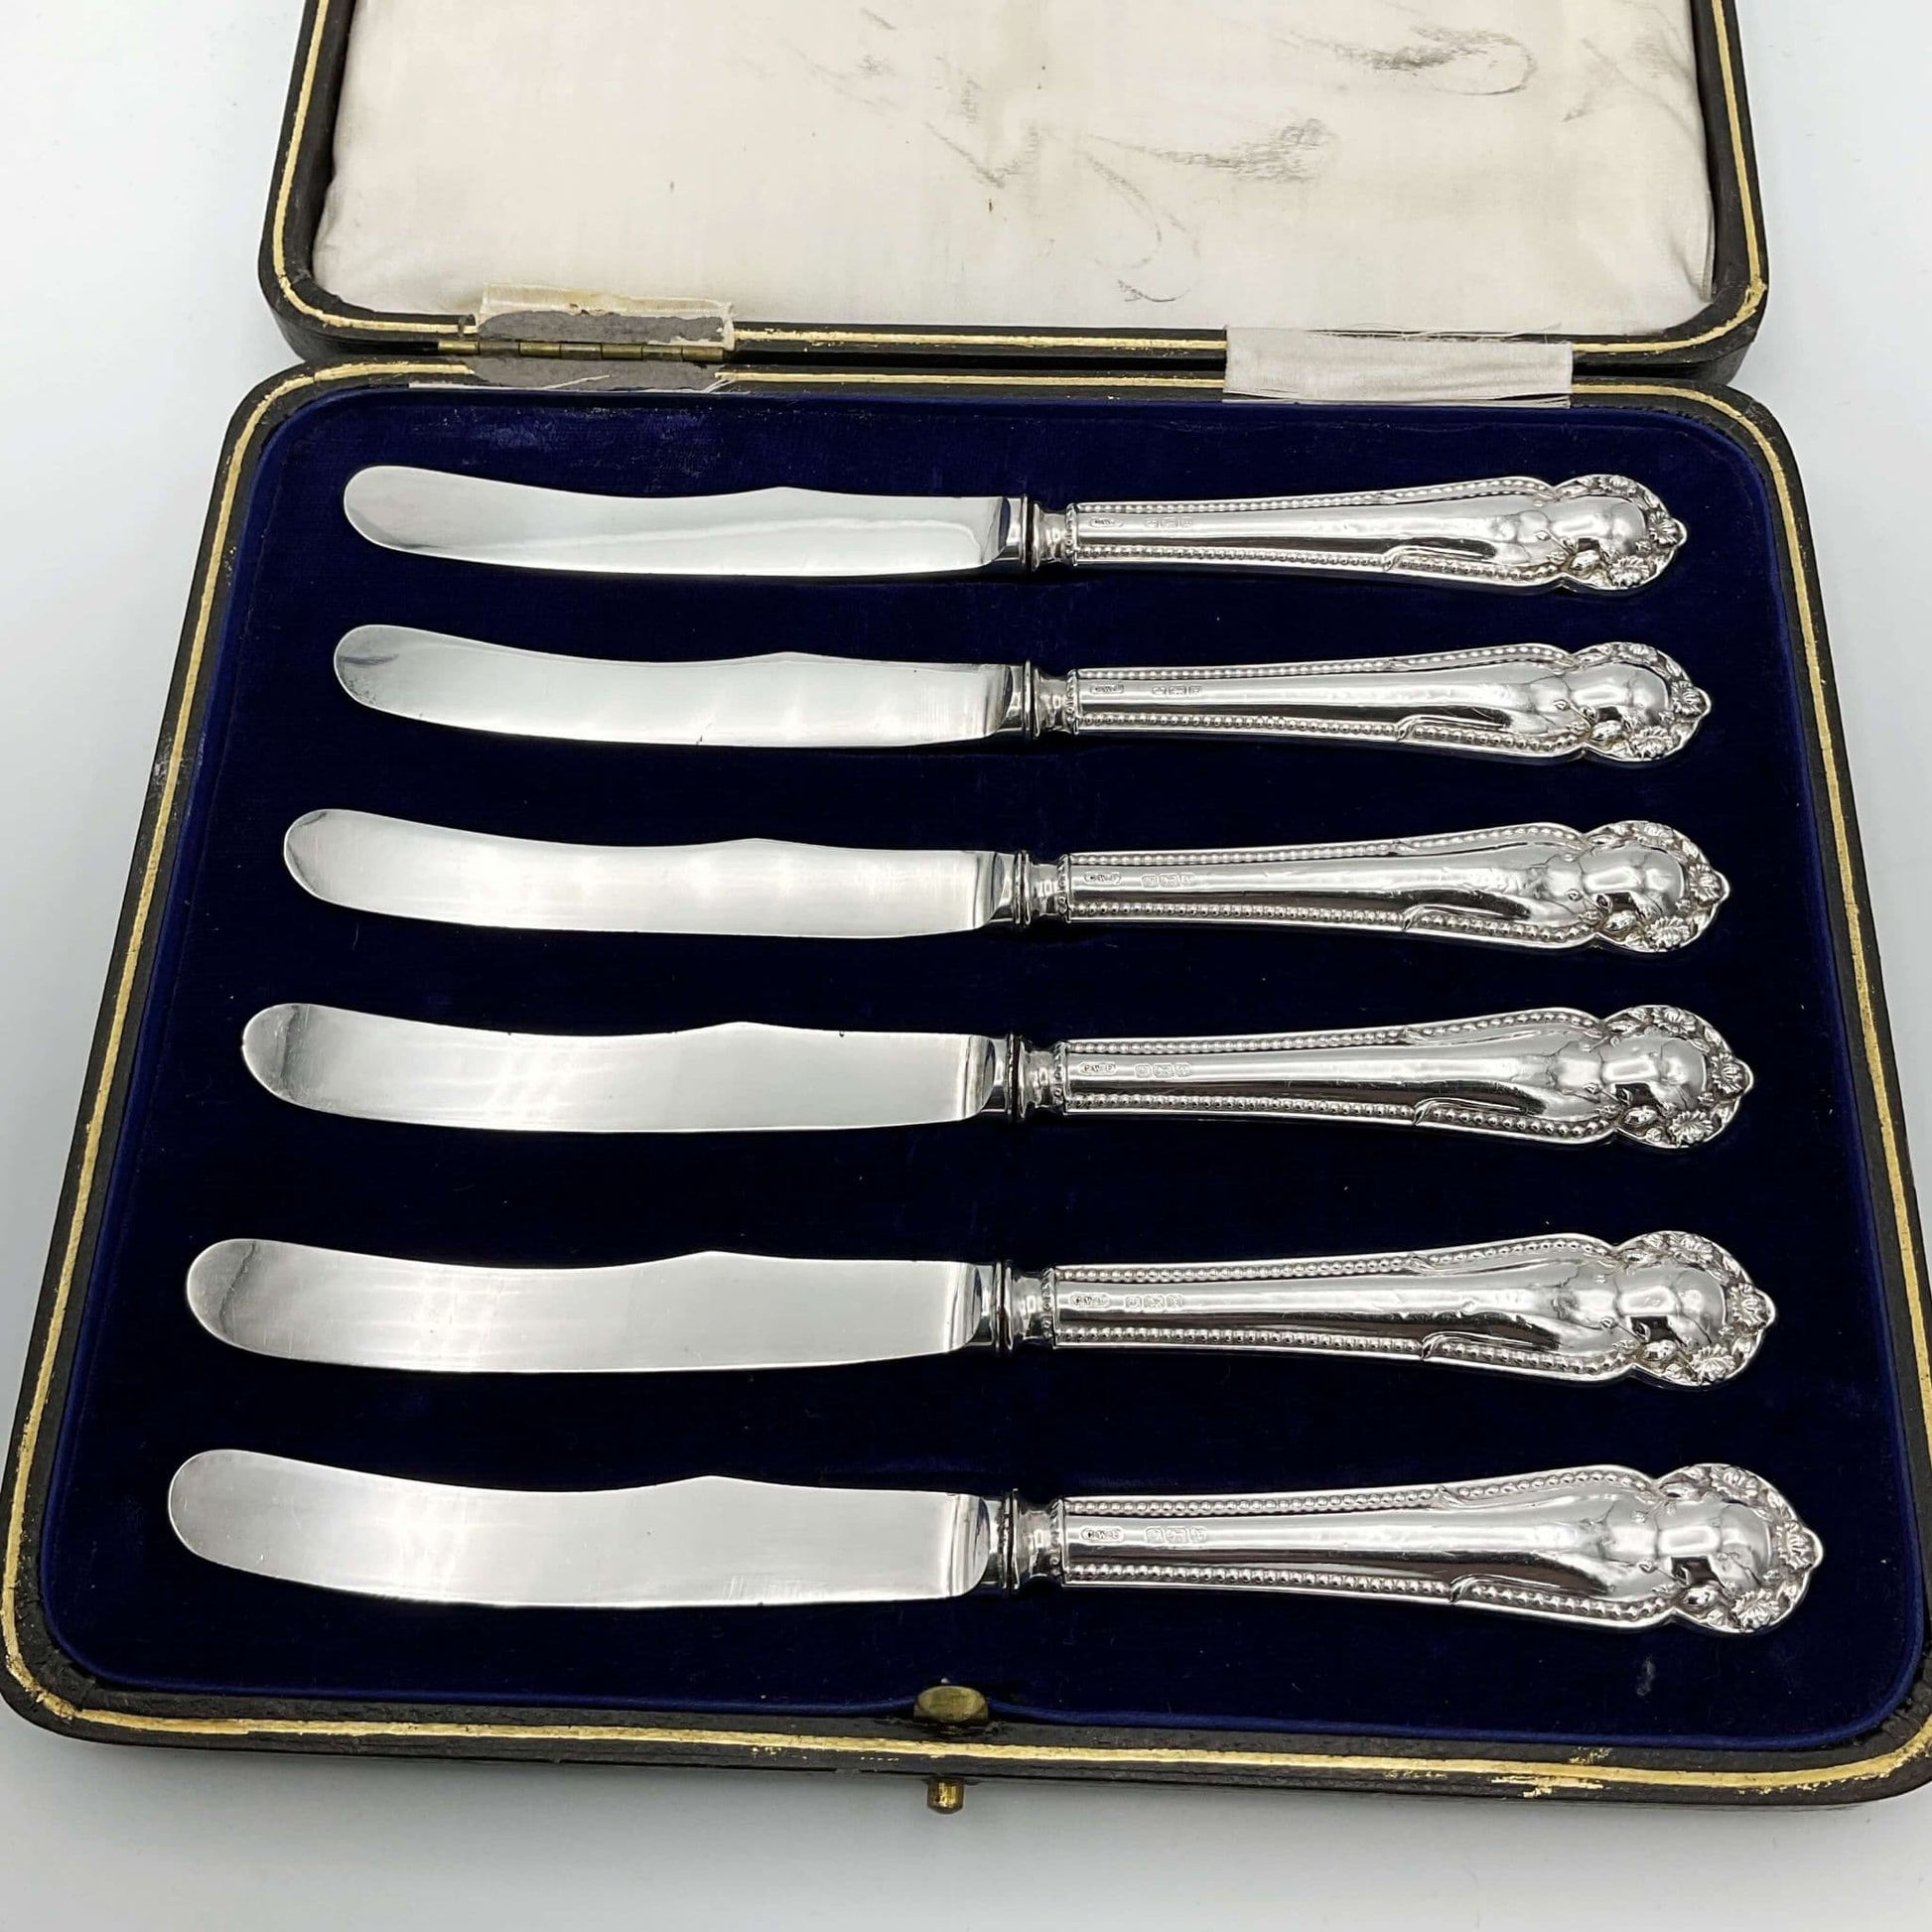  Boxed set of antique silver tea knives on a plain background